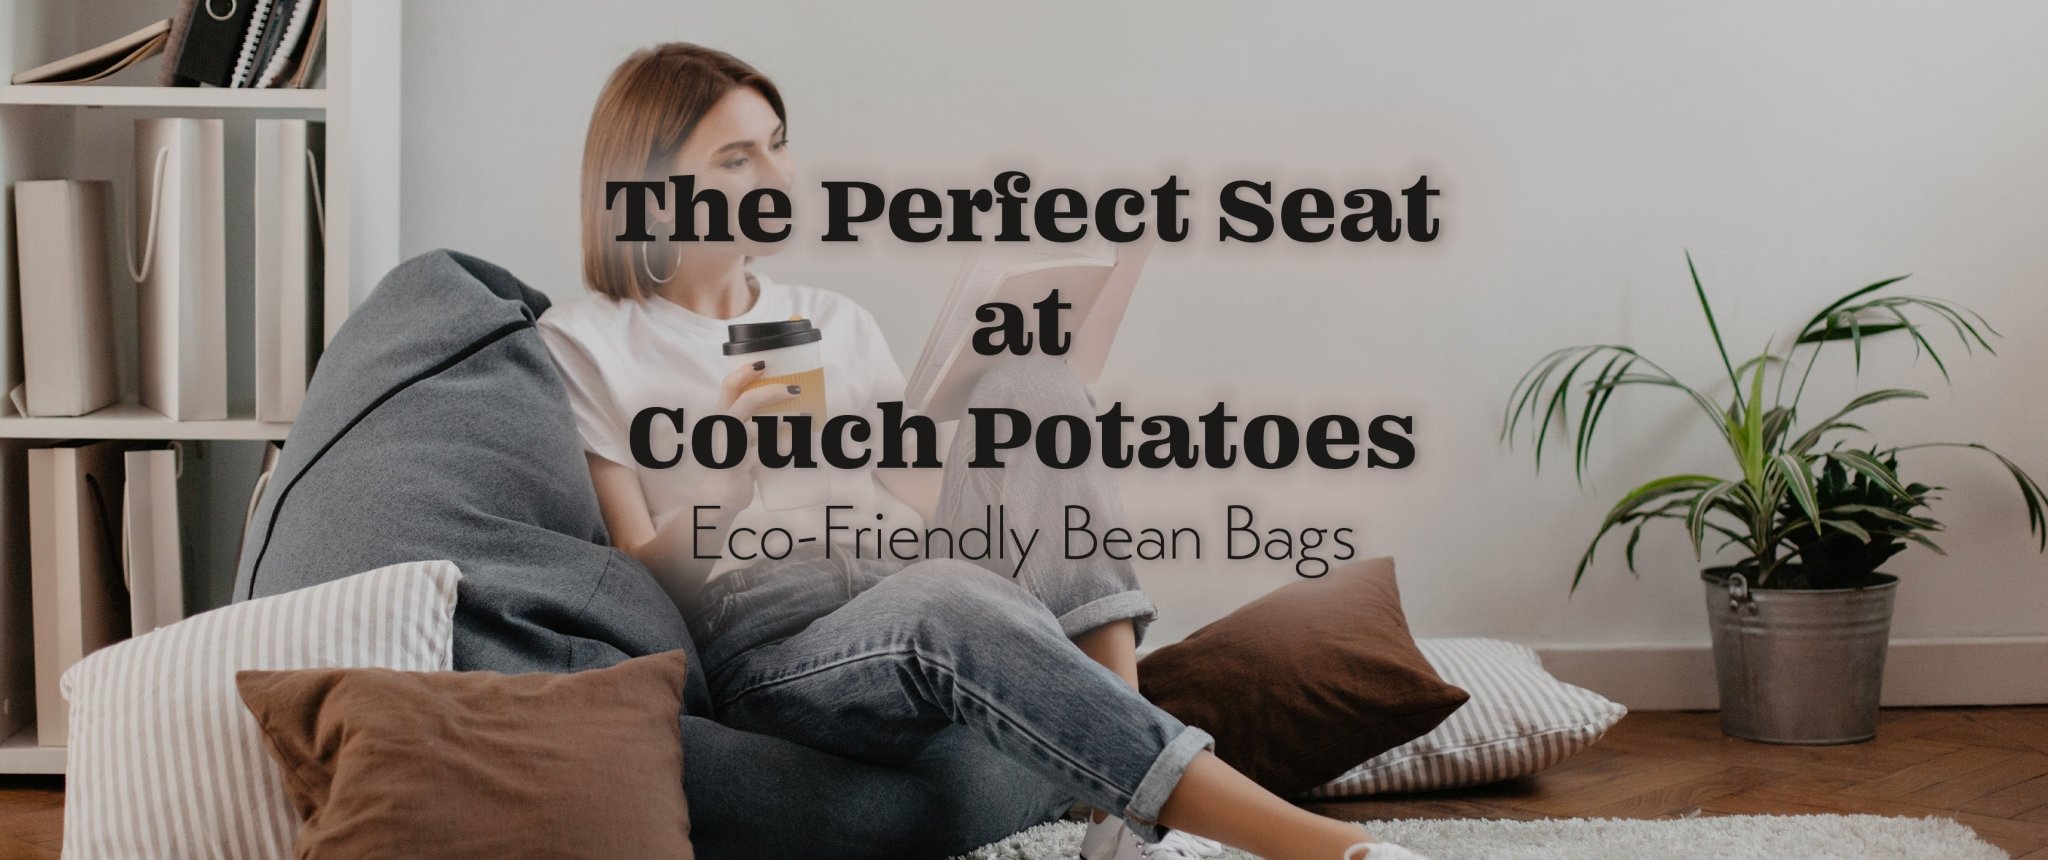 Stuffing Sense: Why There Are No Beans in Bean Bag Chairs